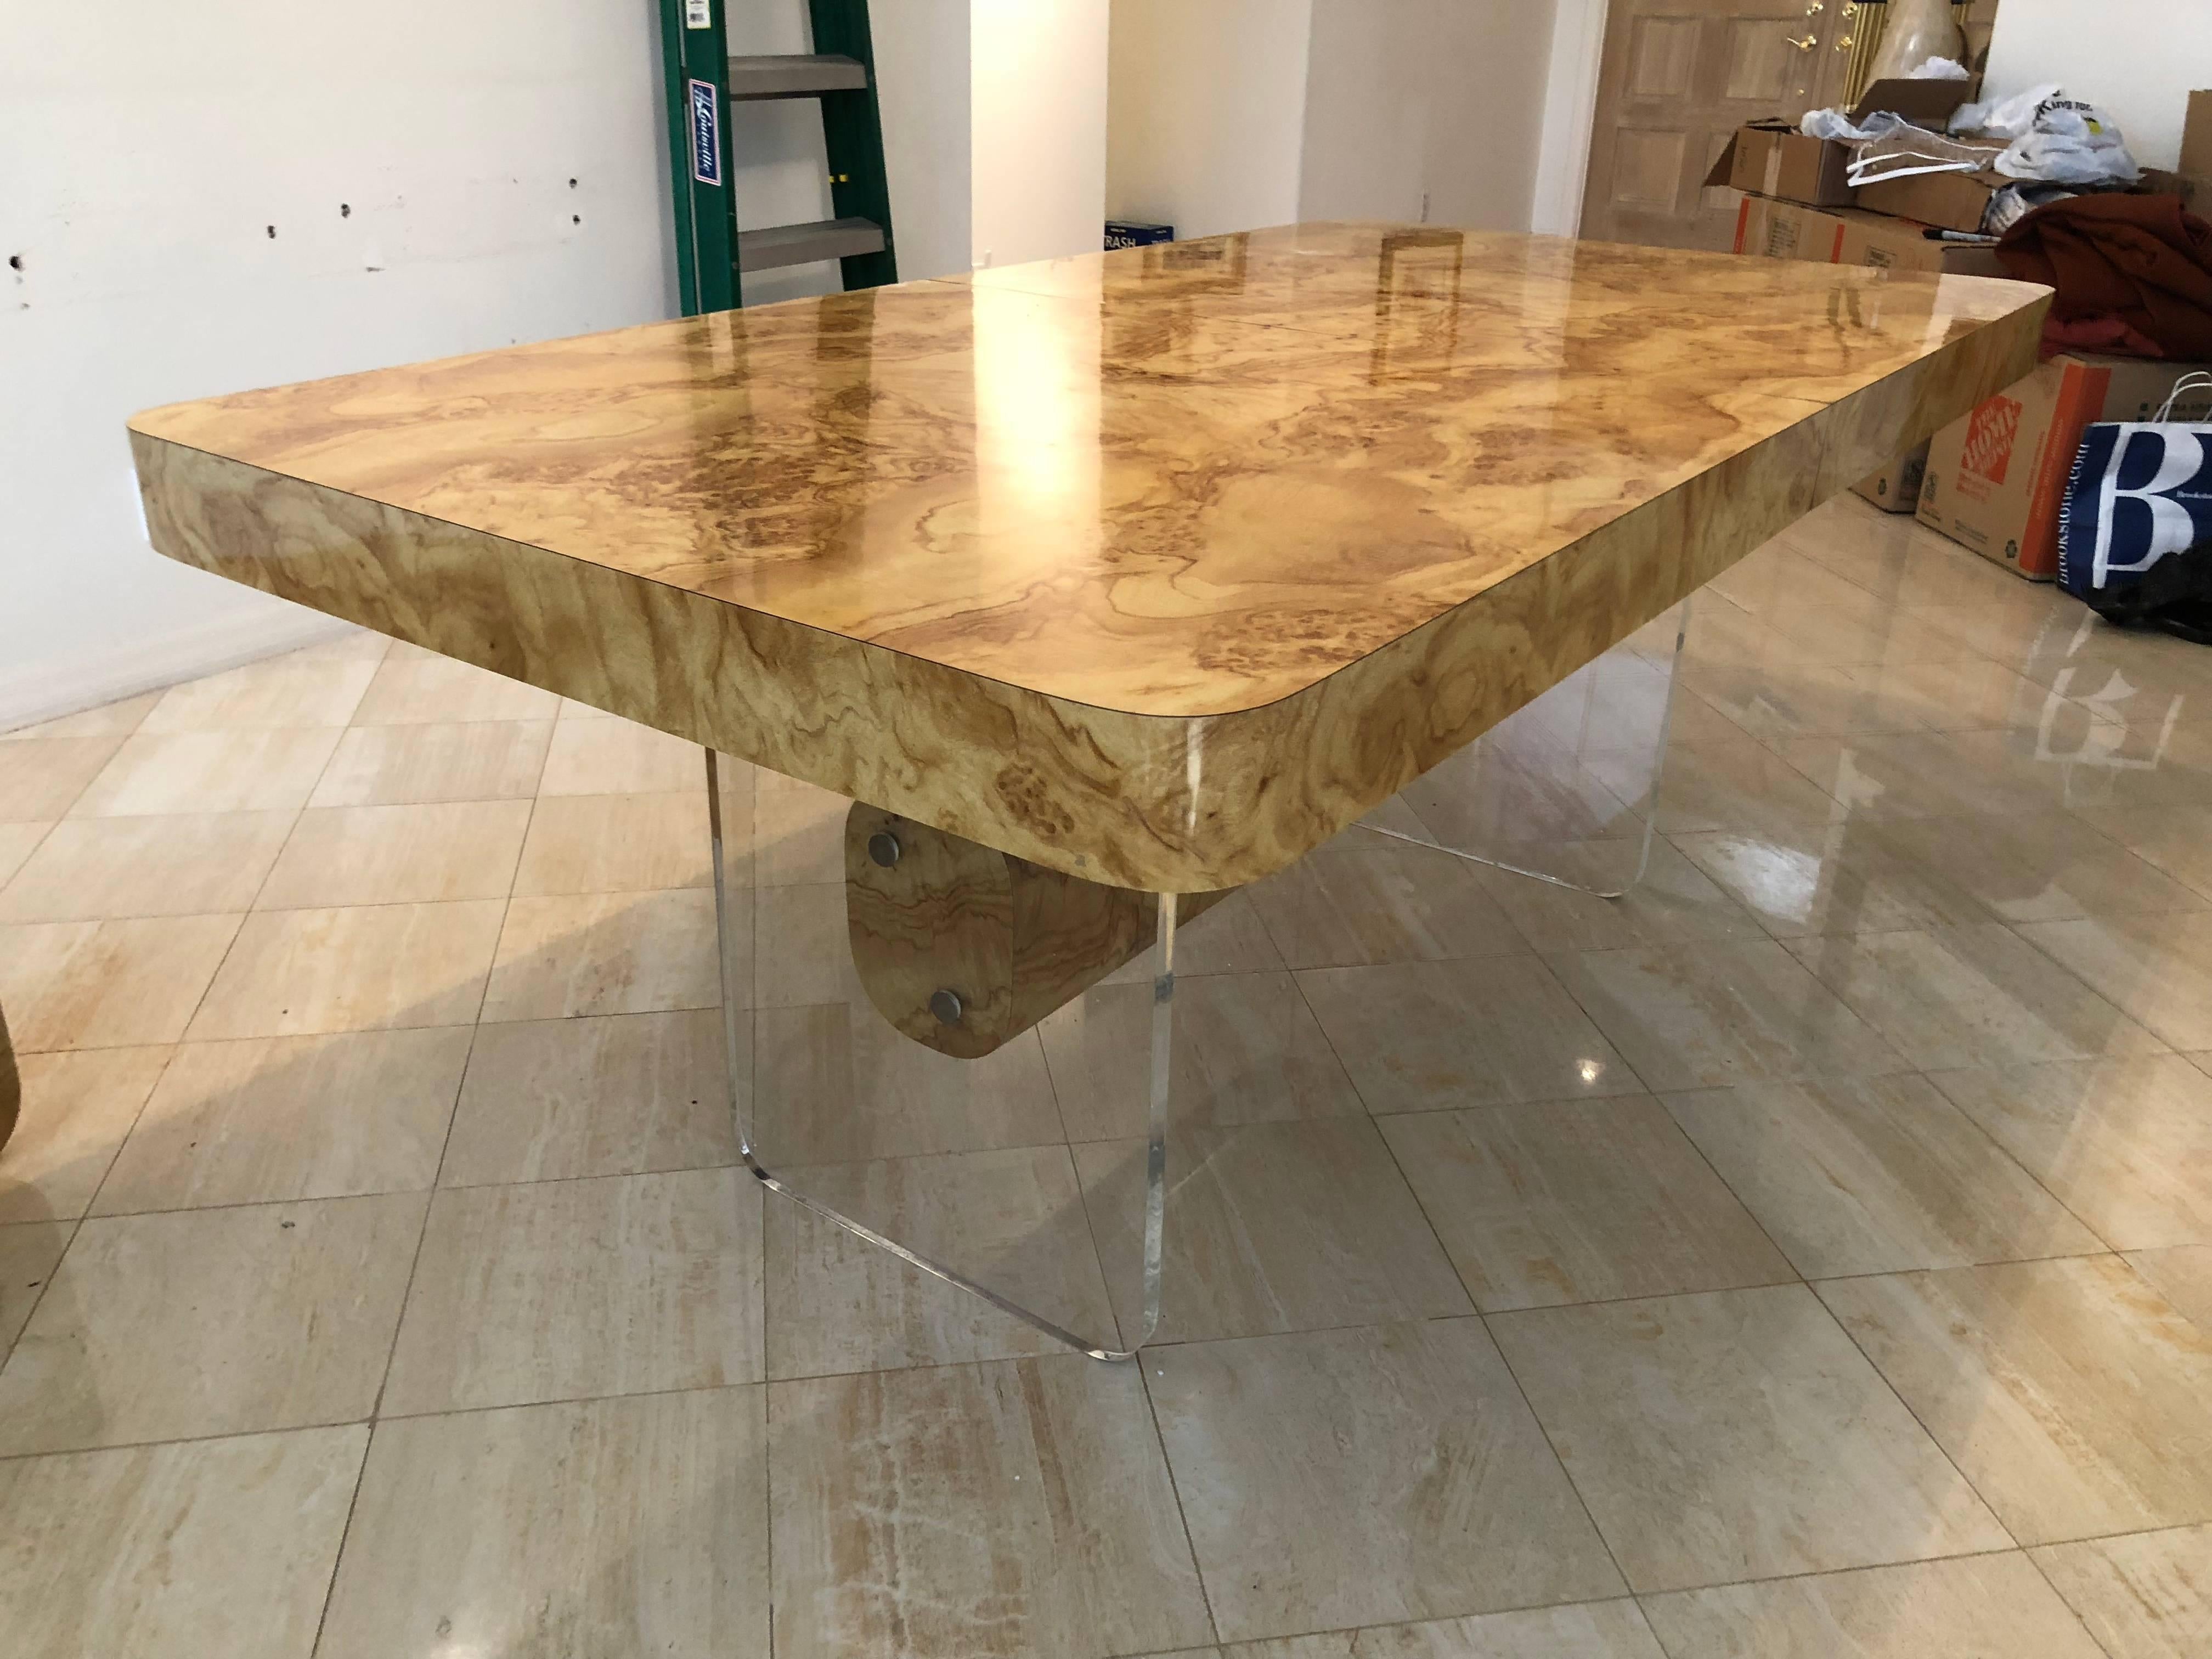 Faux burl wood and Lucite dining table with two extension leaves. Some scuffs on the laminate. Top and bottom are attached but i wanted to picture the base as well to be better viewed. Matching wall.

There are two leaves which each measure 16